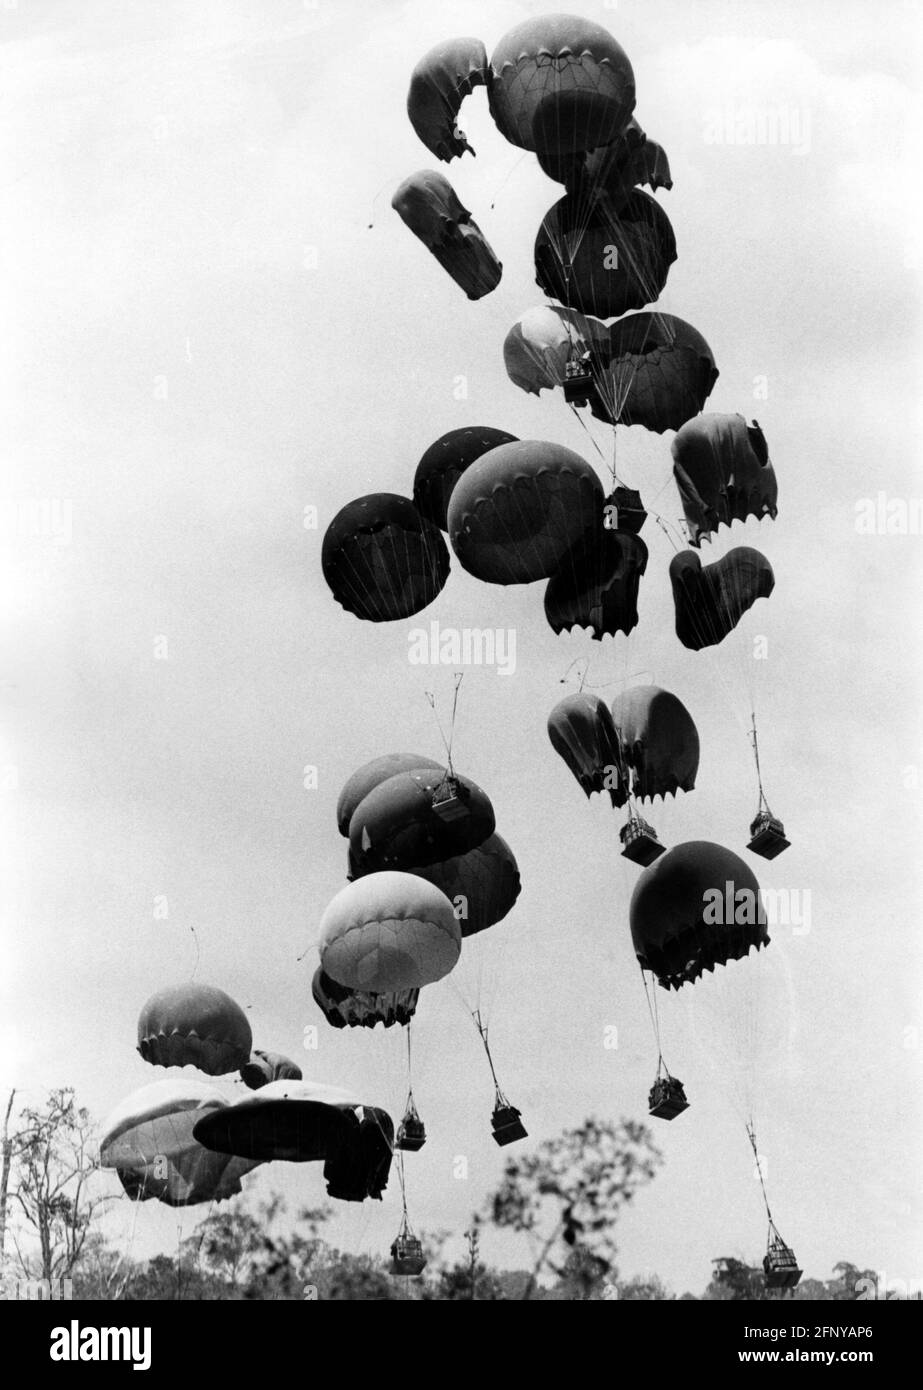 geography/travel, Asia, Vietnam, Viet Nam, War, airdrop from war material with parachute, Saigon, ADDITIONAL-RIGHTS-CLEARANCE-INFO-NOT-AVAILABLE Stock Photo